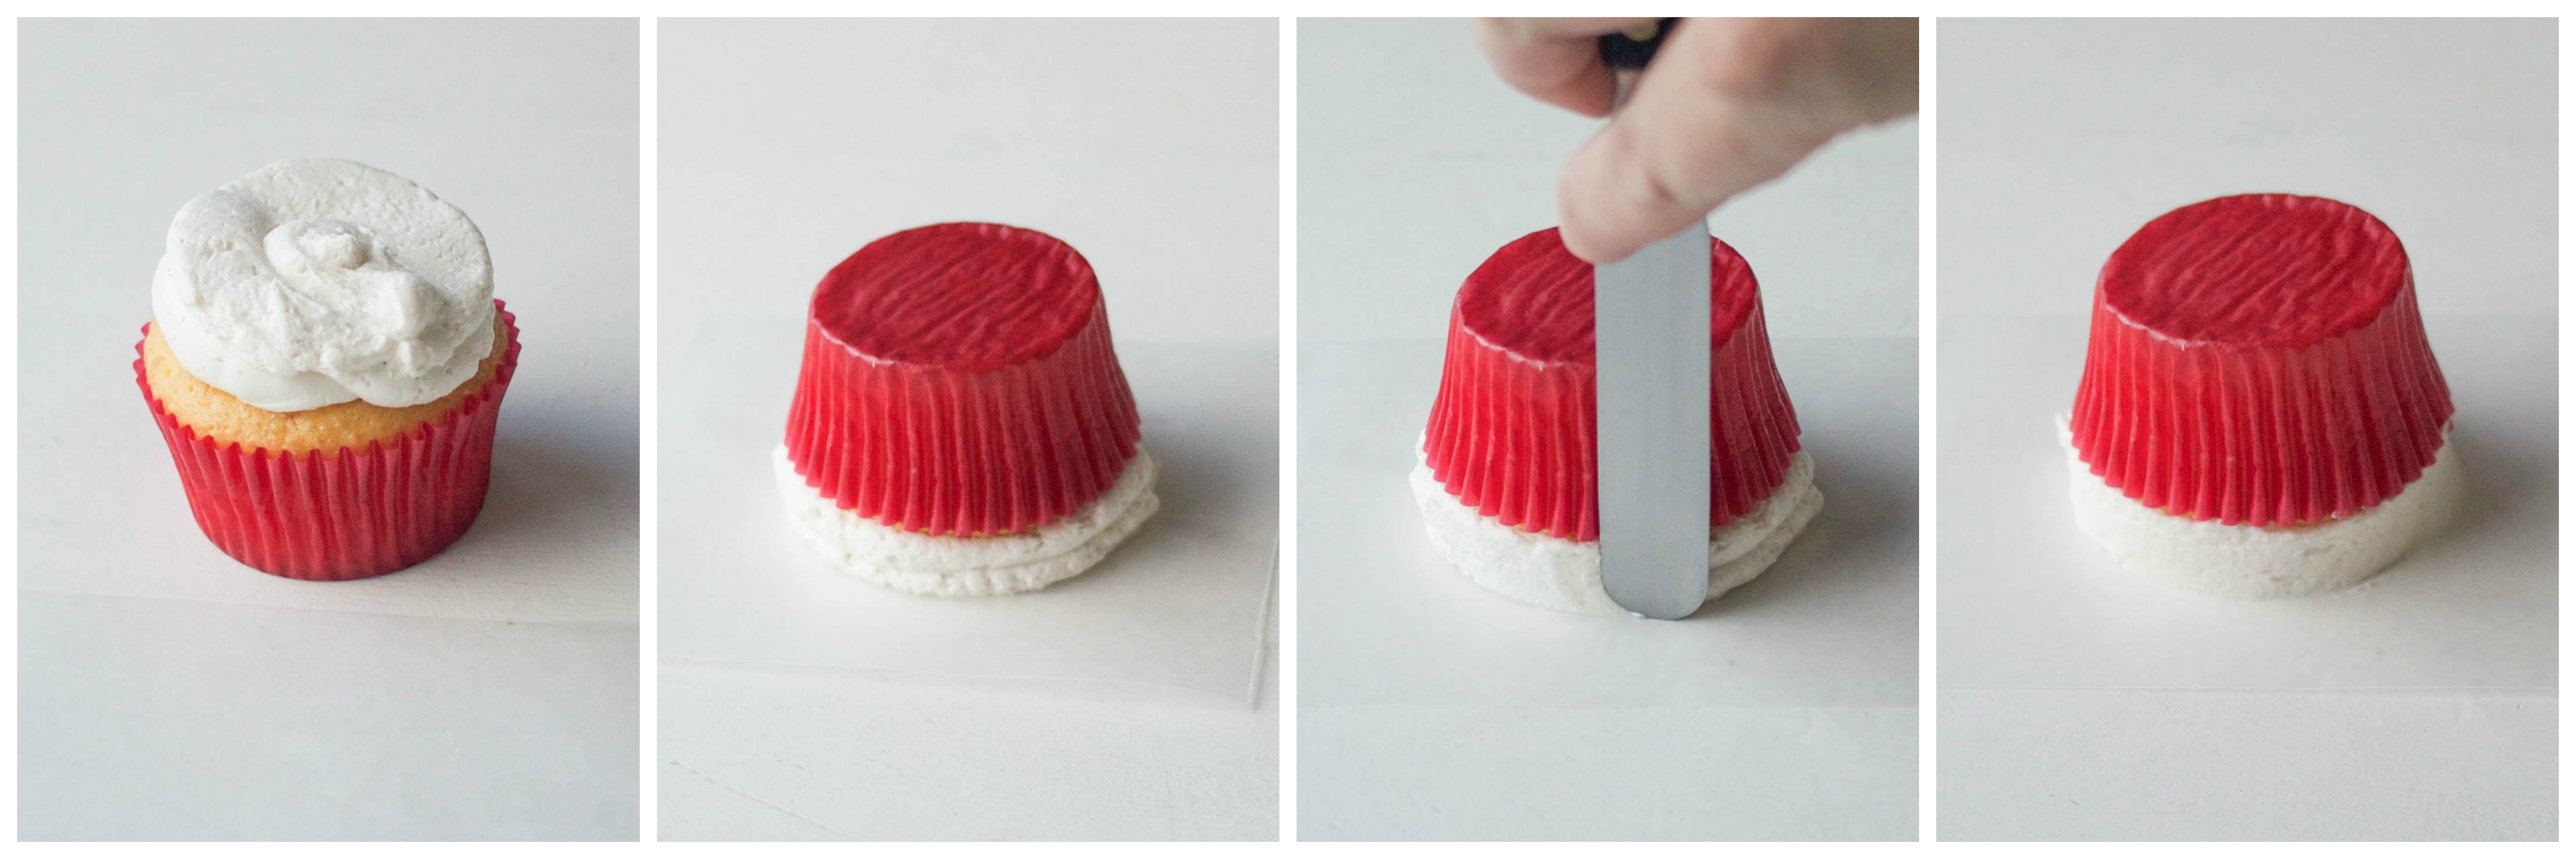 How to Make Flat Top Cupcakes  